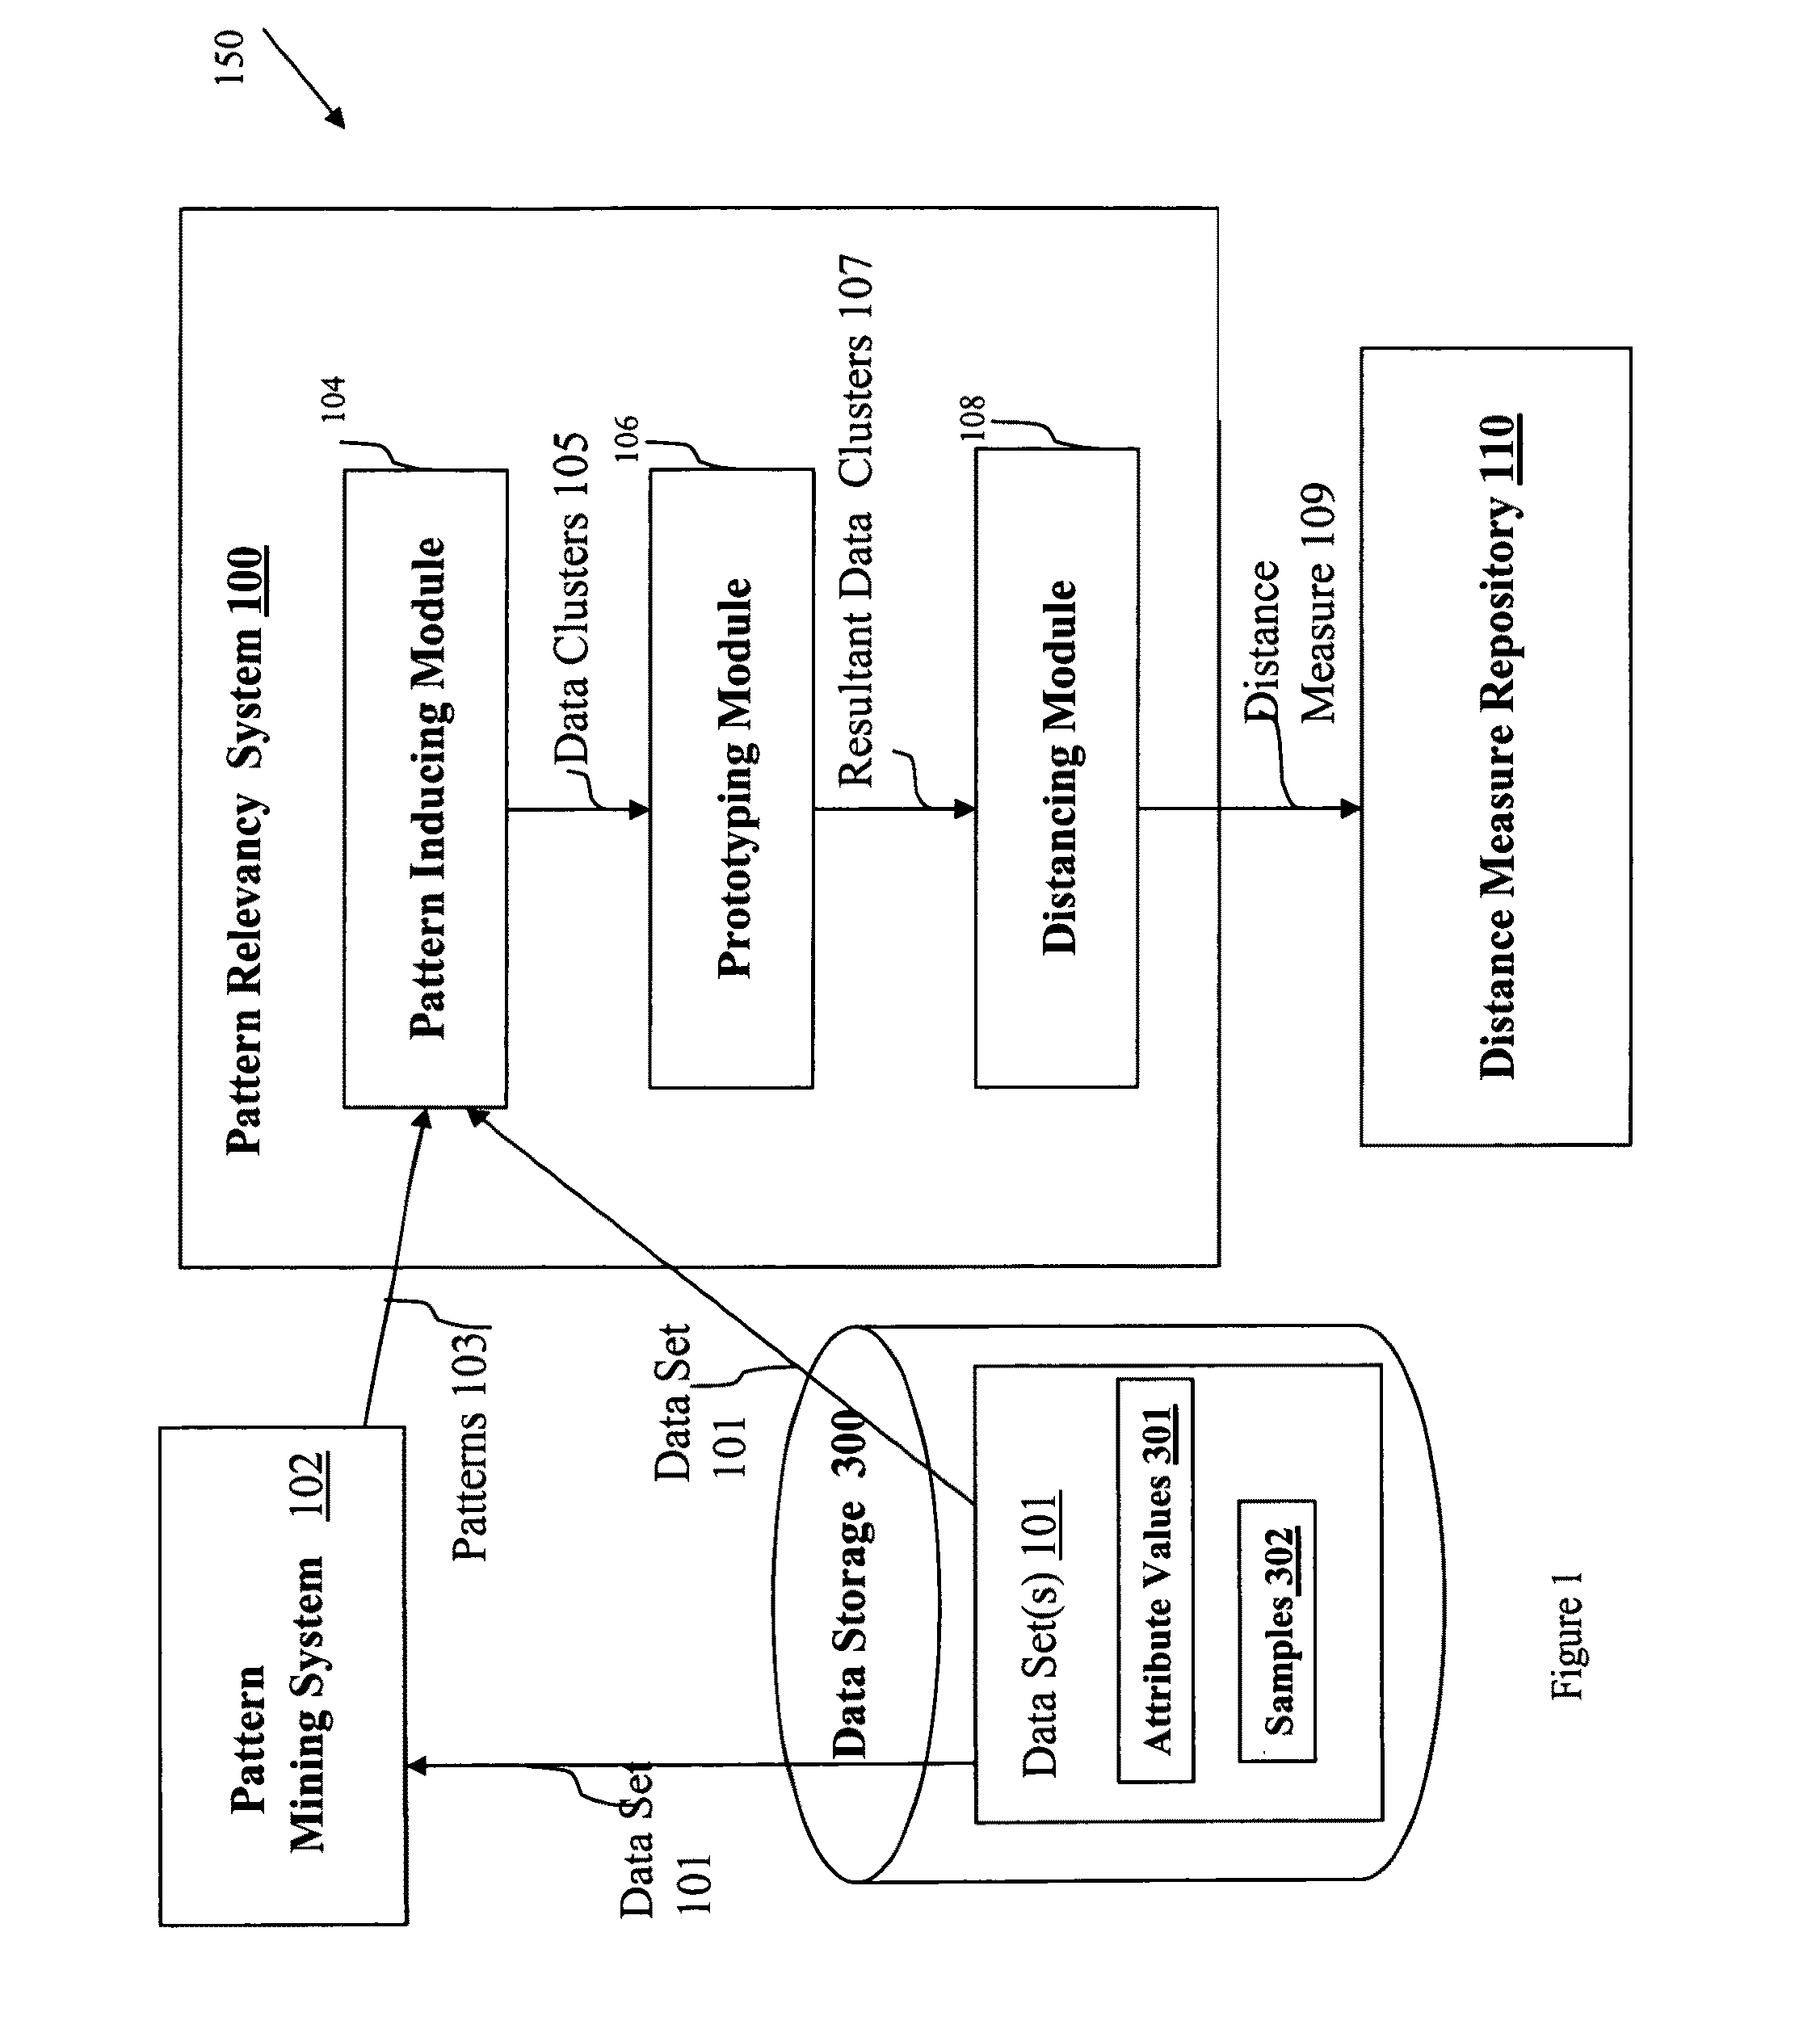 System and method for detecting and analyzing pattern relationships